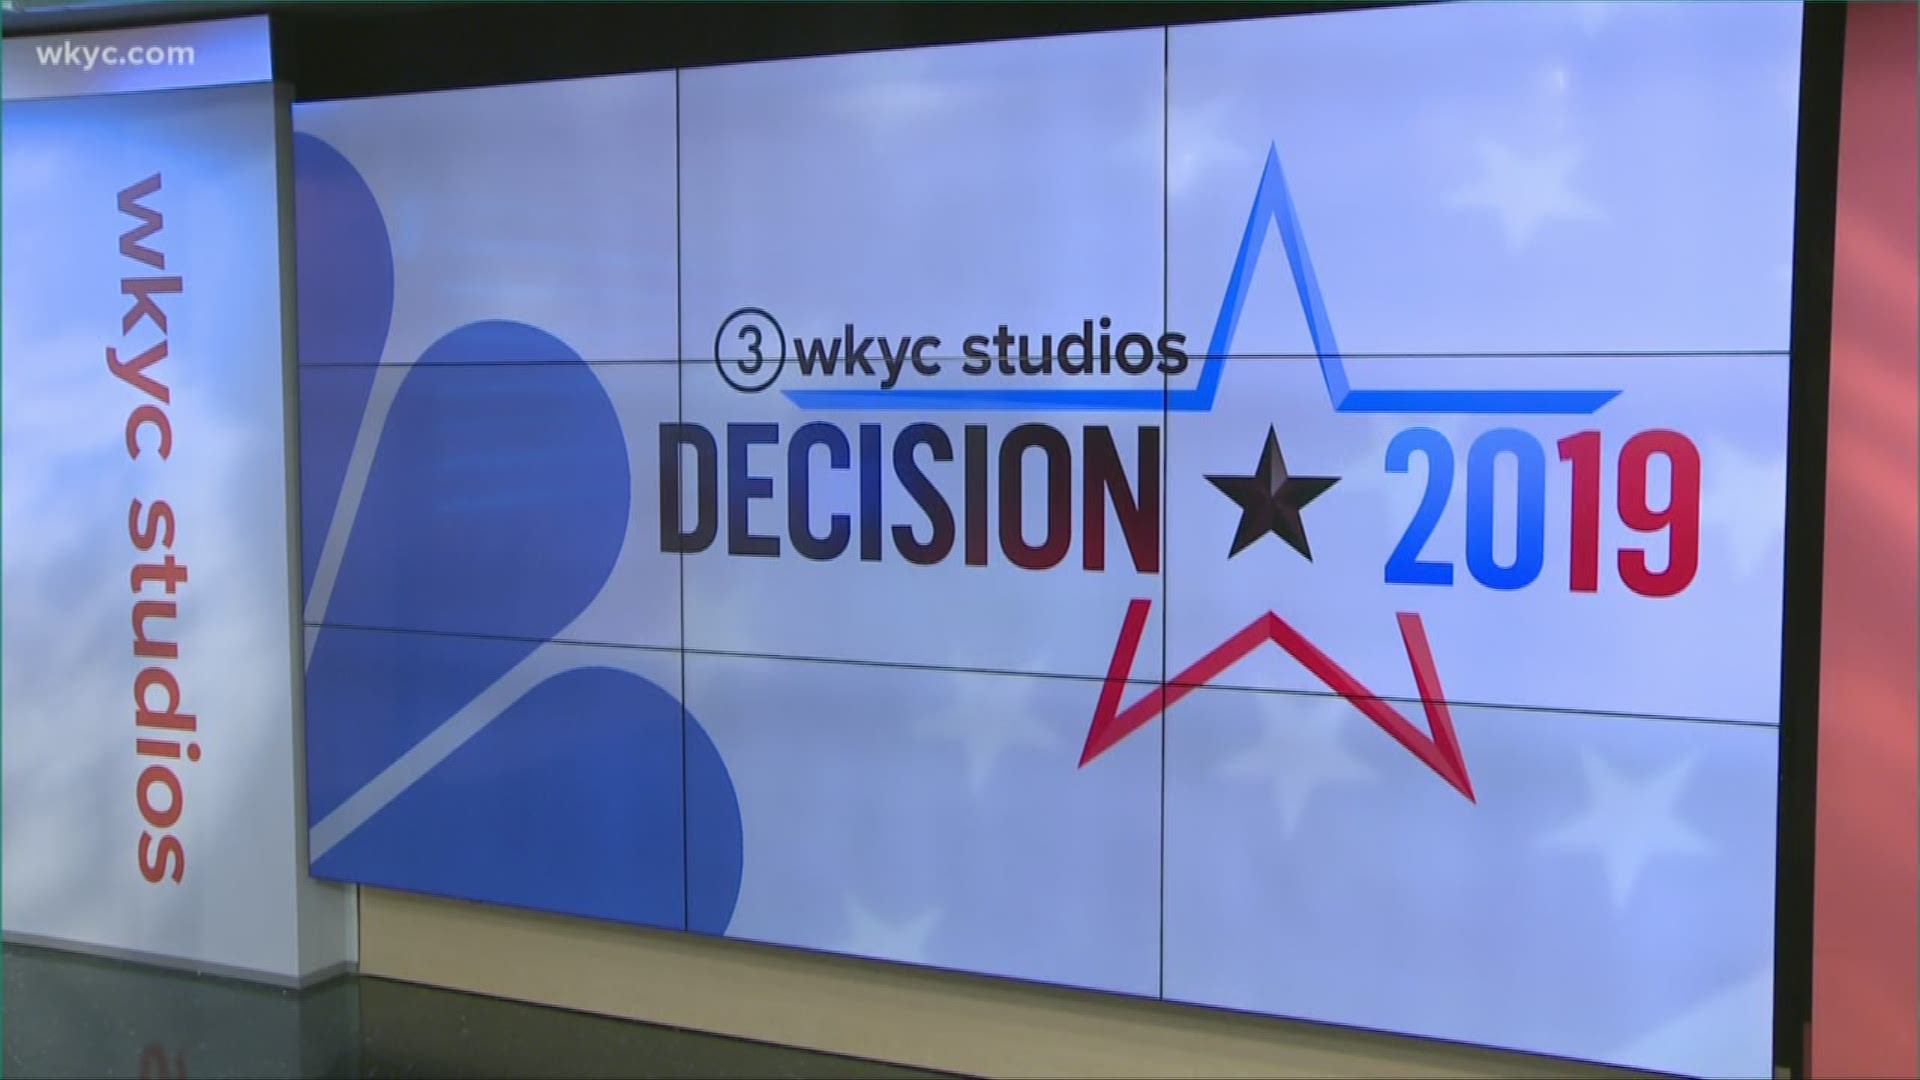 Decision 2019: November 5 marks election day. Here's 3 issues you need to know about.